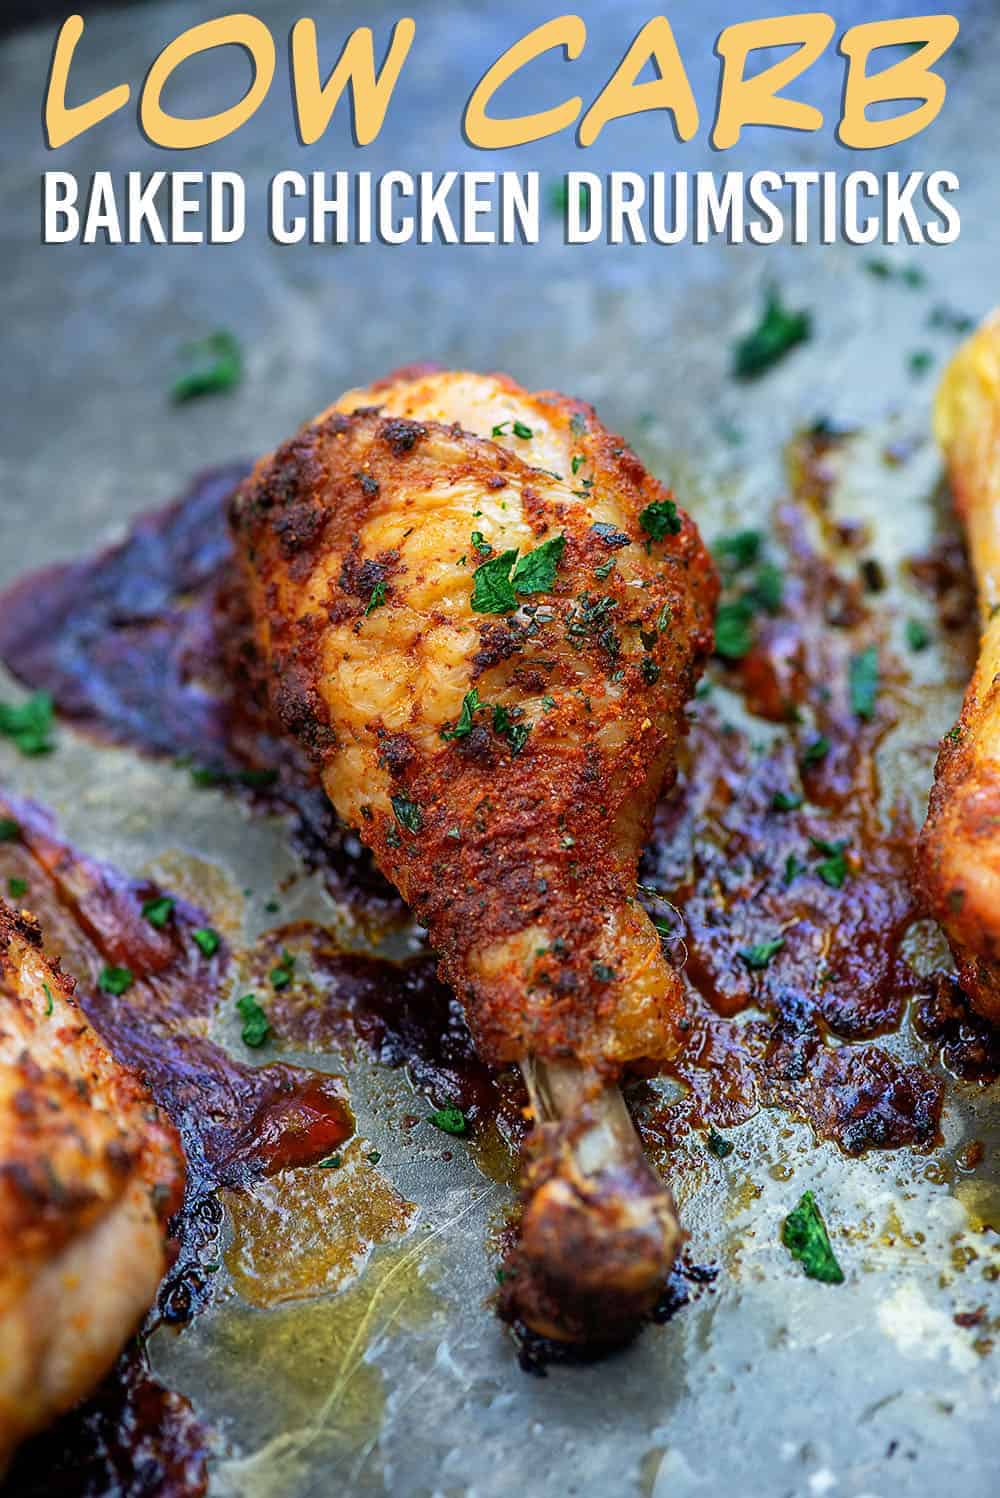 Baked Chicken Drumsticks With Crispy Skin And Juicy Chicken,Eggplant Recipes Turkish